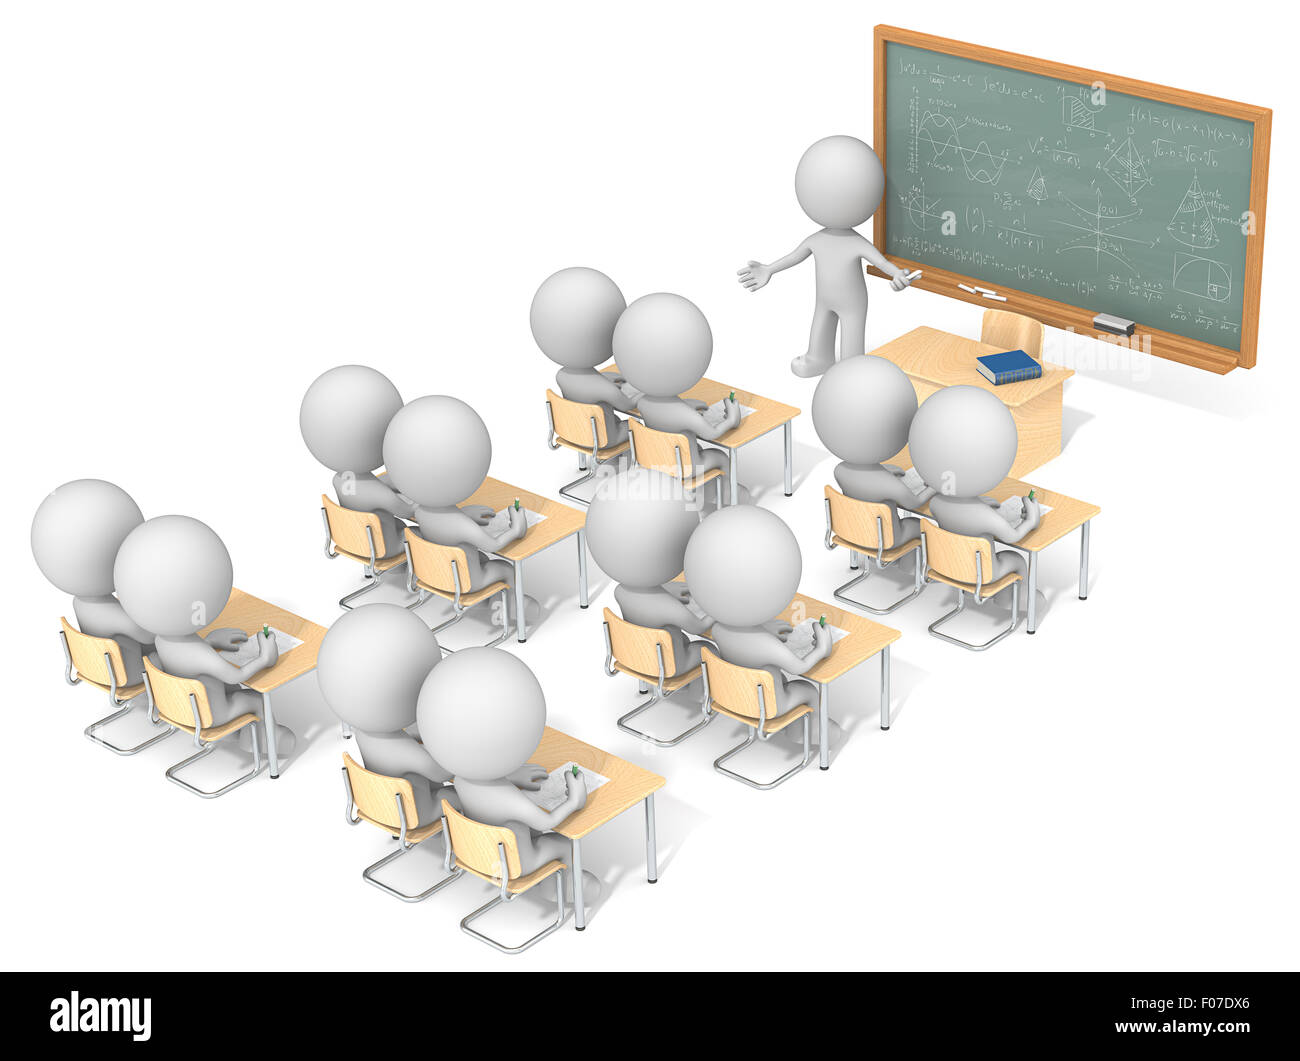 Dude 3D characters X13 in classroom. Chalkboard with sample Mathematics. Top, side view. Stock Photo